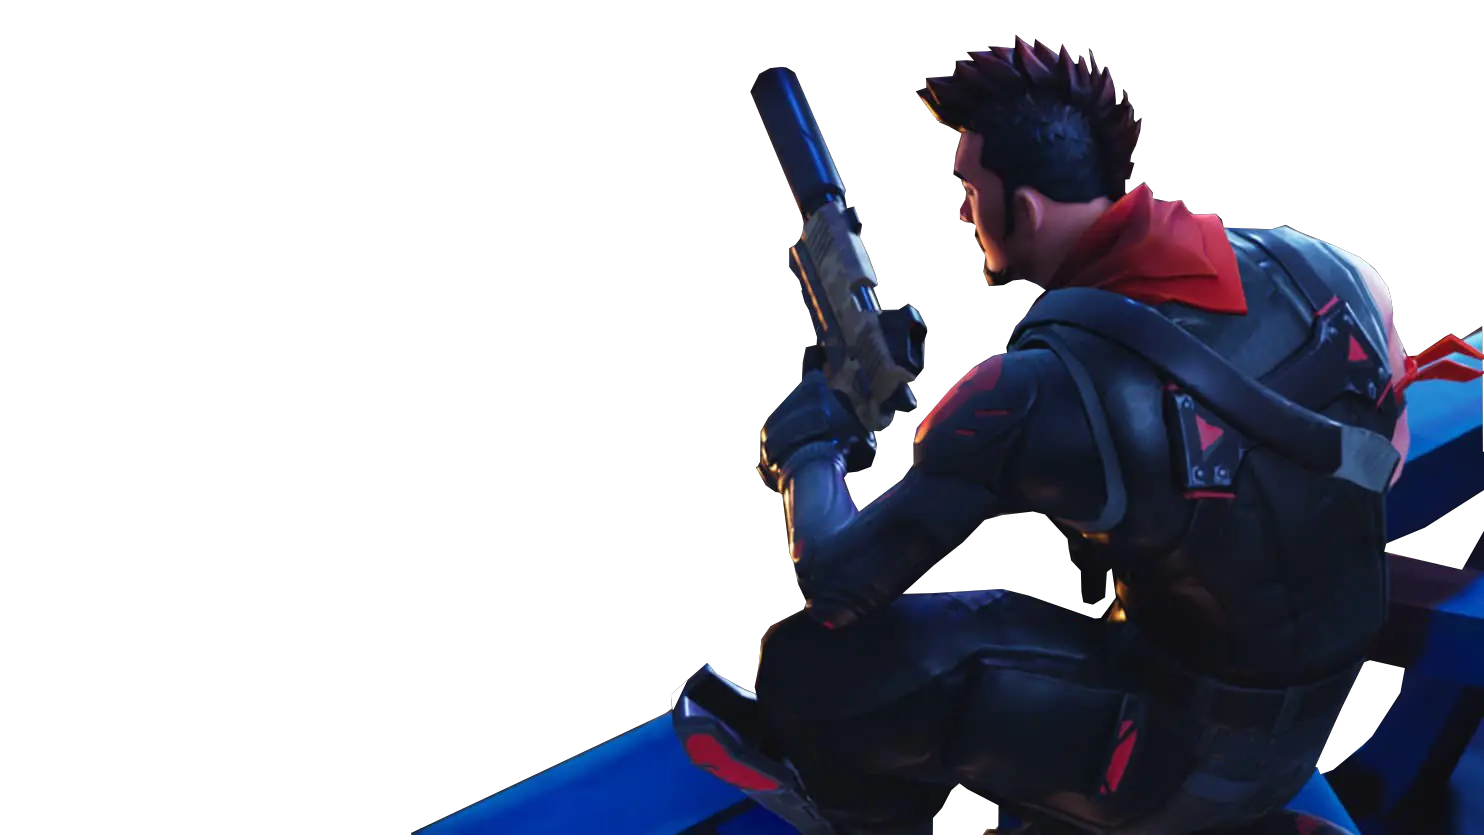 Sitting With A Gun Fortnite Thumbnail Template Png Image Fortnite Free Thumbnail Template Rifle Png